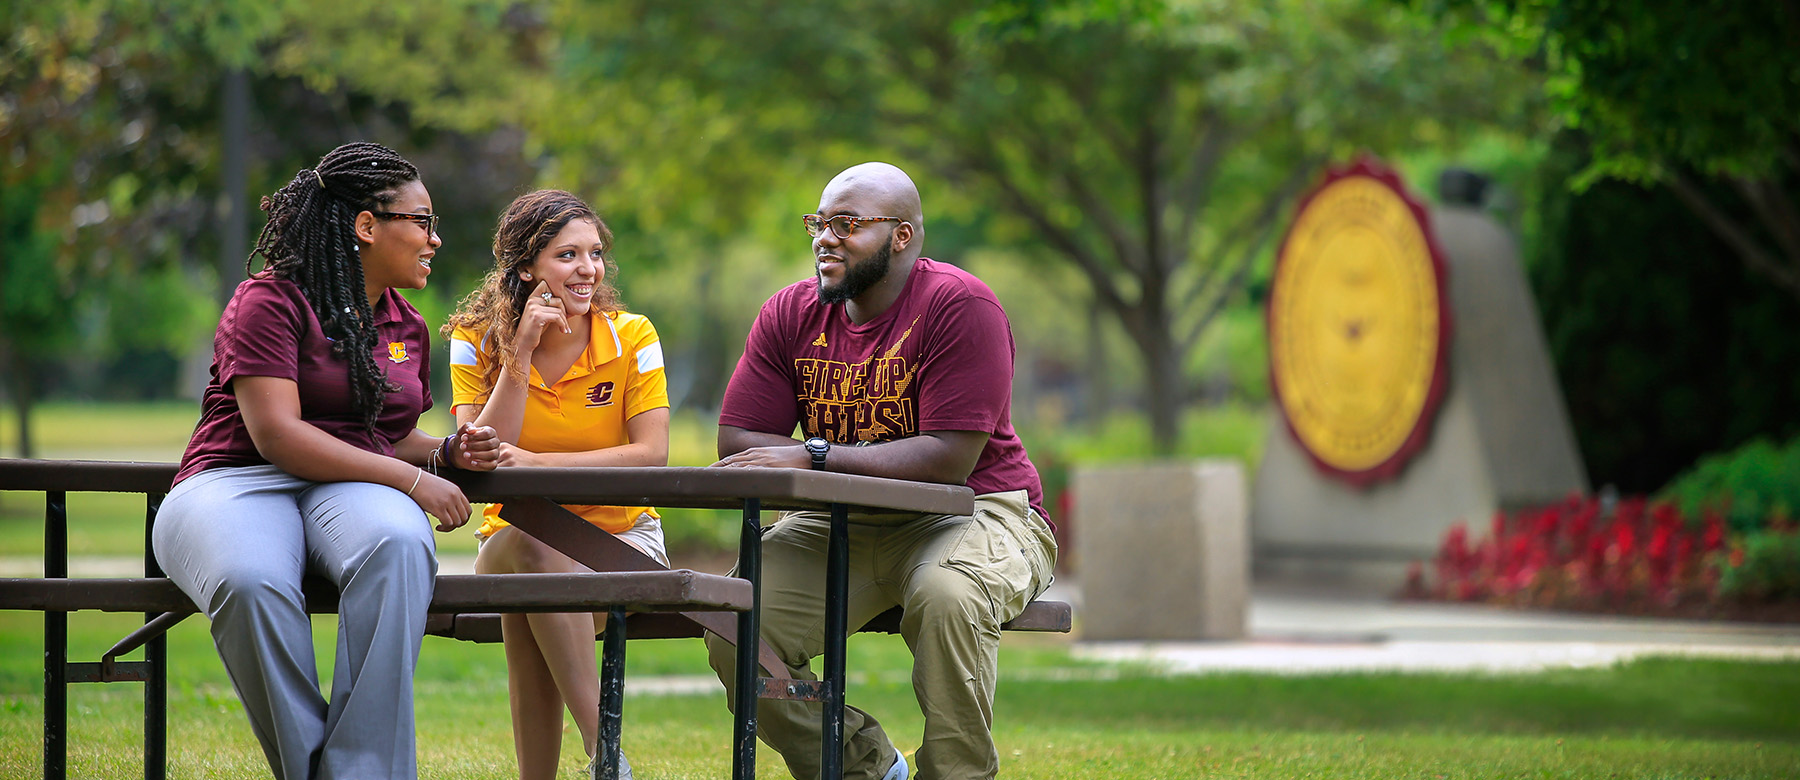 A student sits at a campus picnic bench with two faculty mentors during the summer, with green trees and flowers.